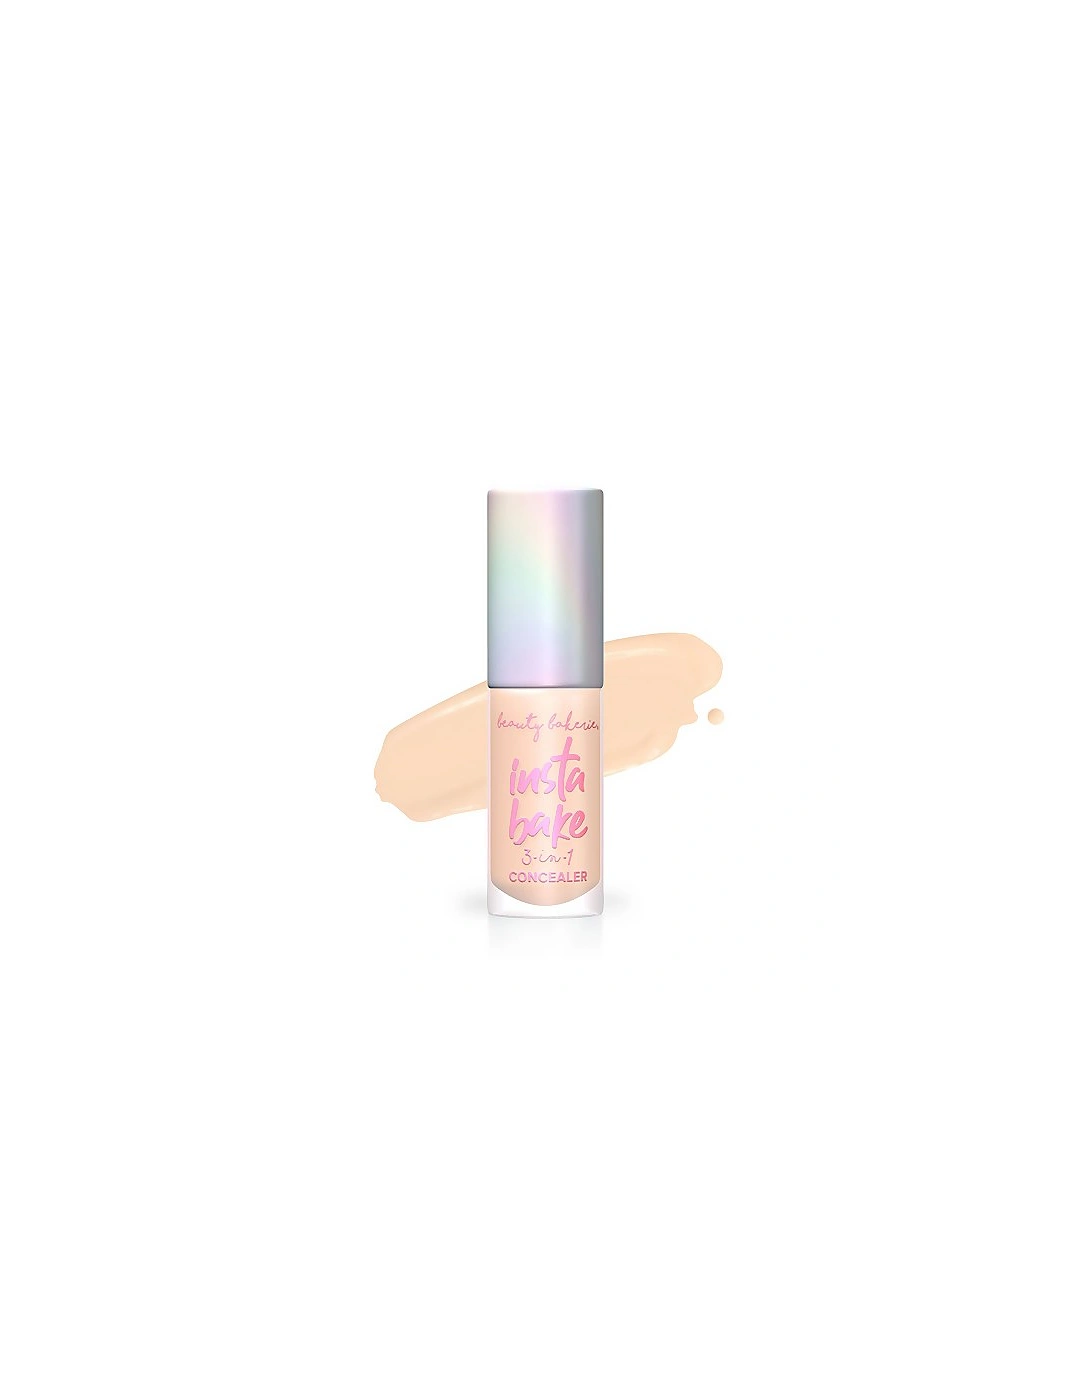 InstaBake 3-in-1 Hydrating Concealer - 001 Phun Intended